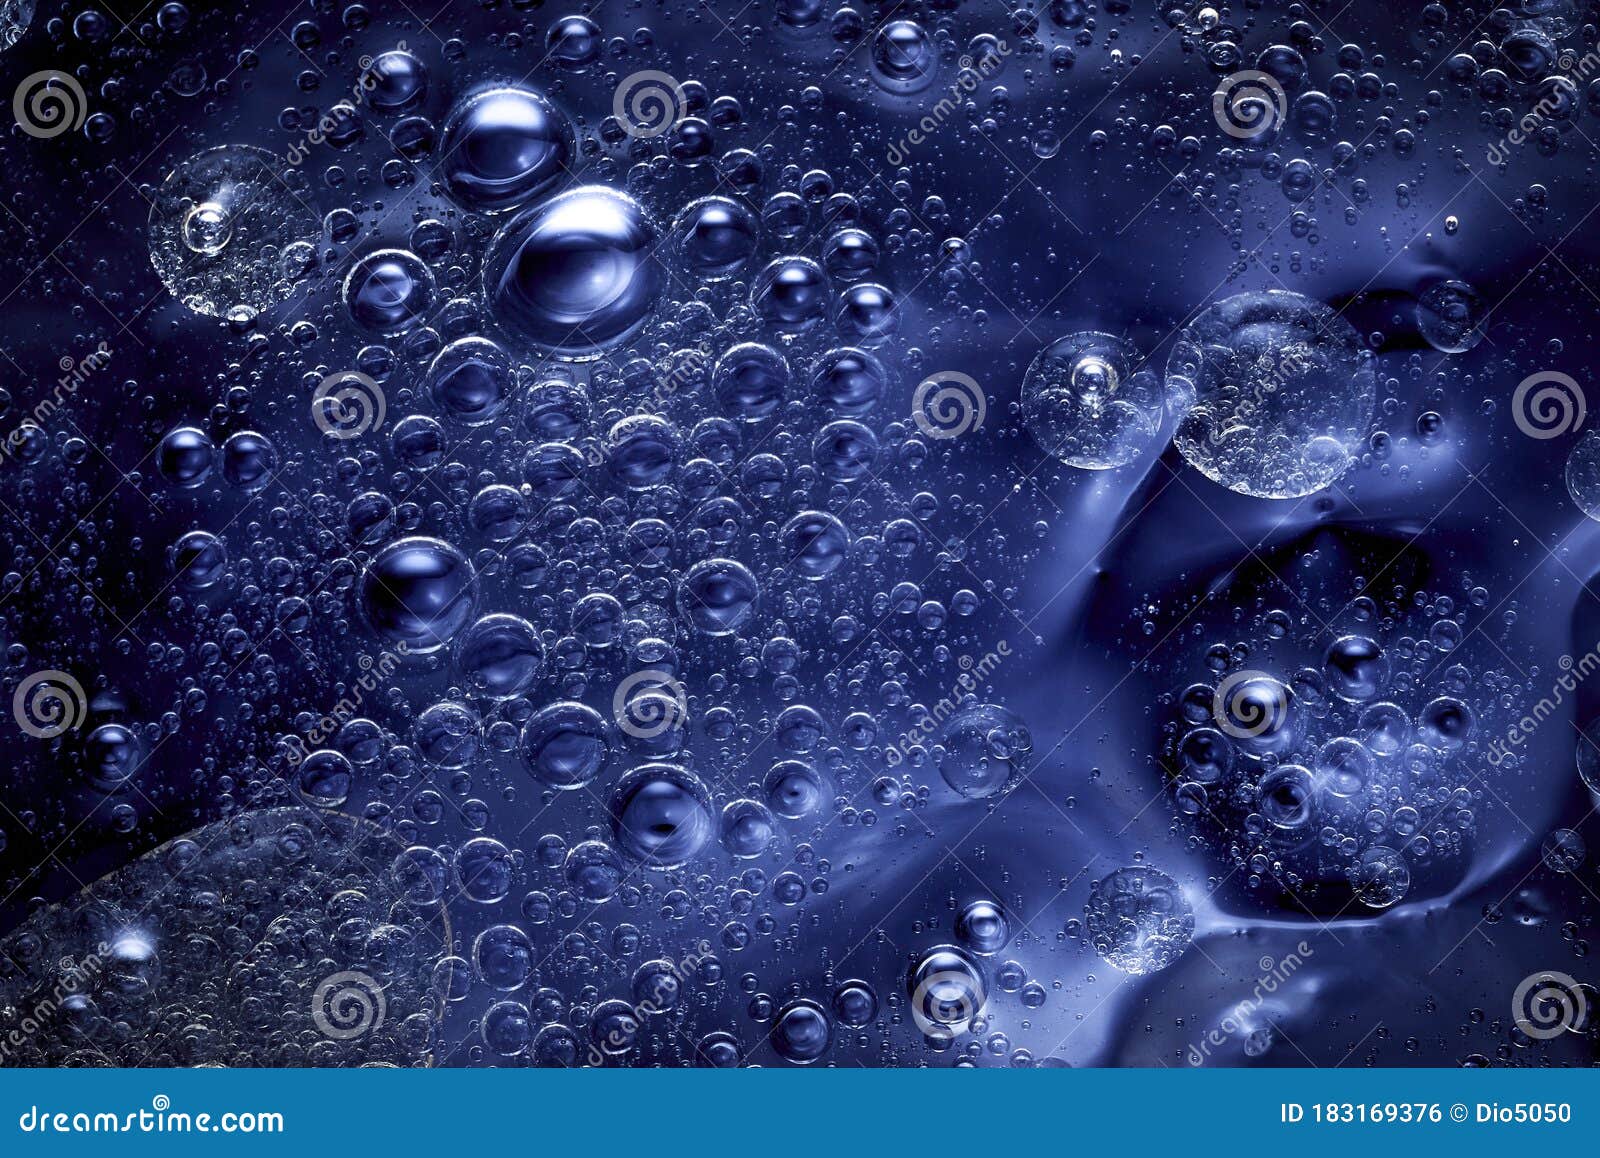 blue abstract background with agglomeration of moving bubbles